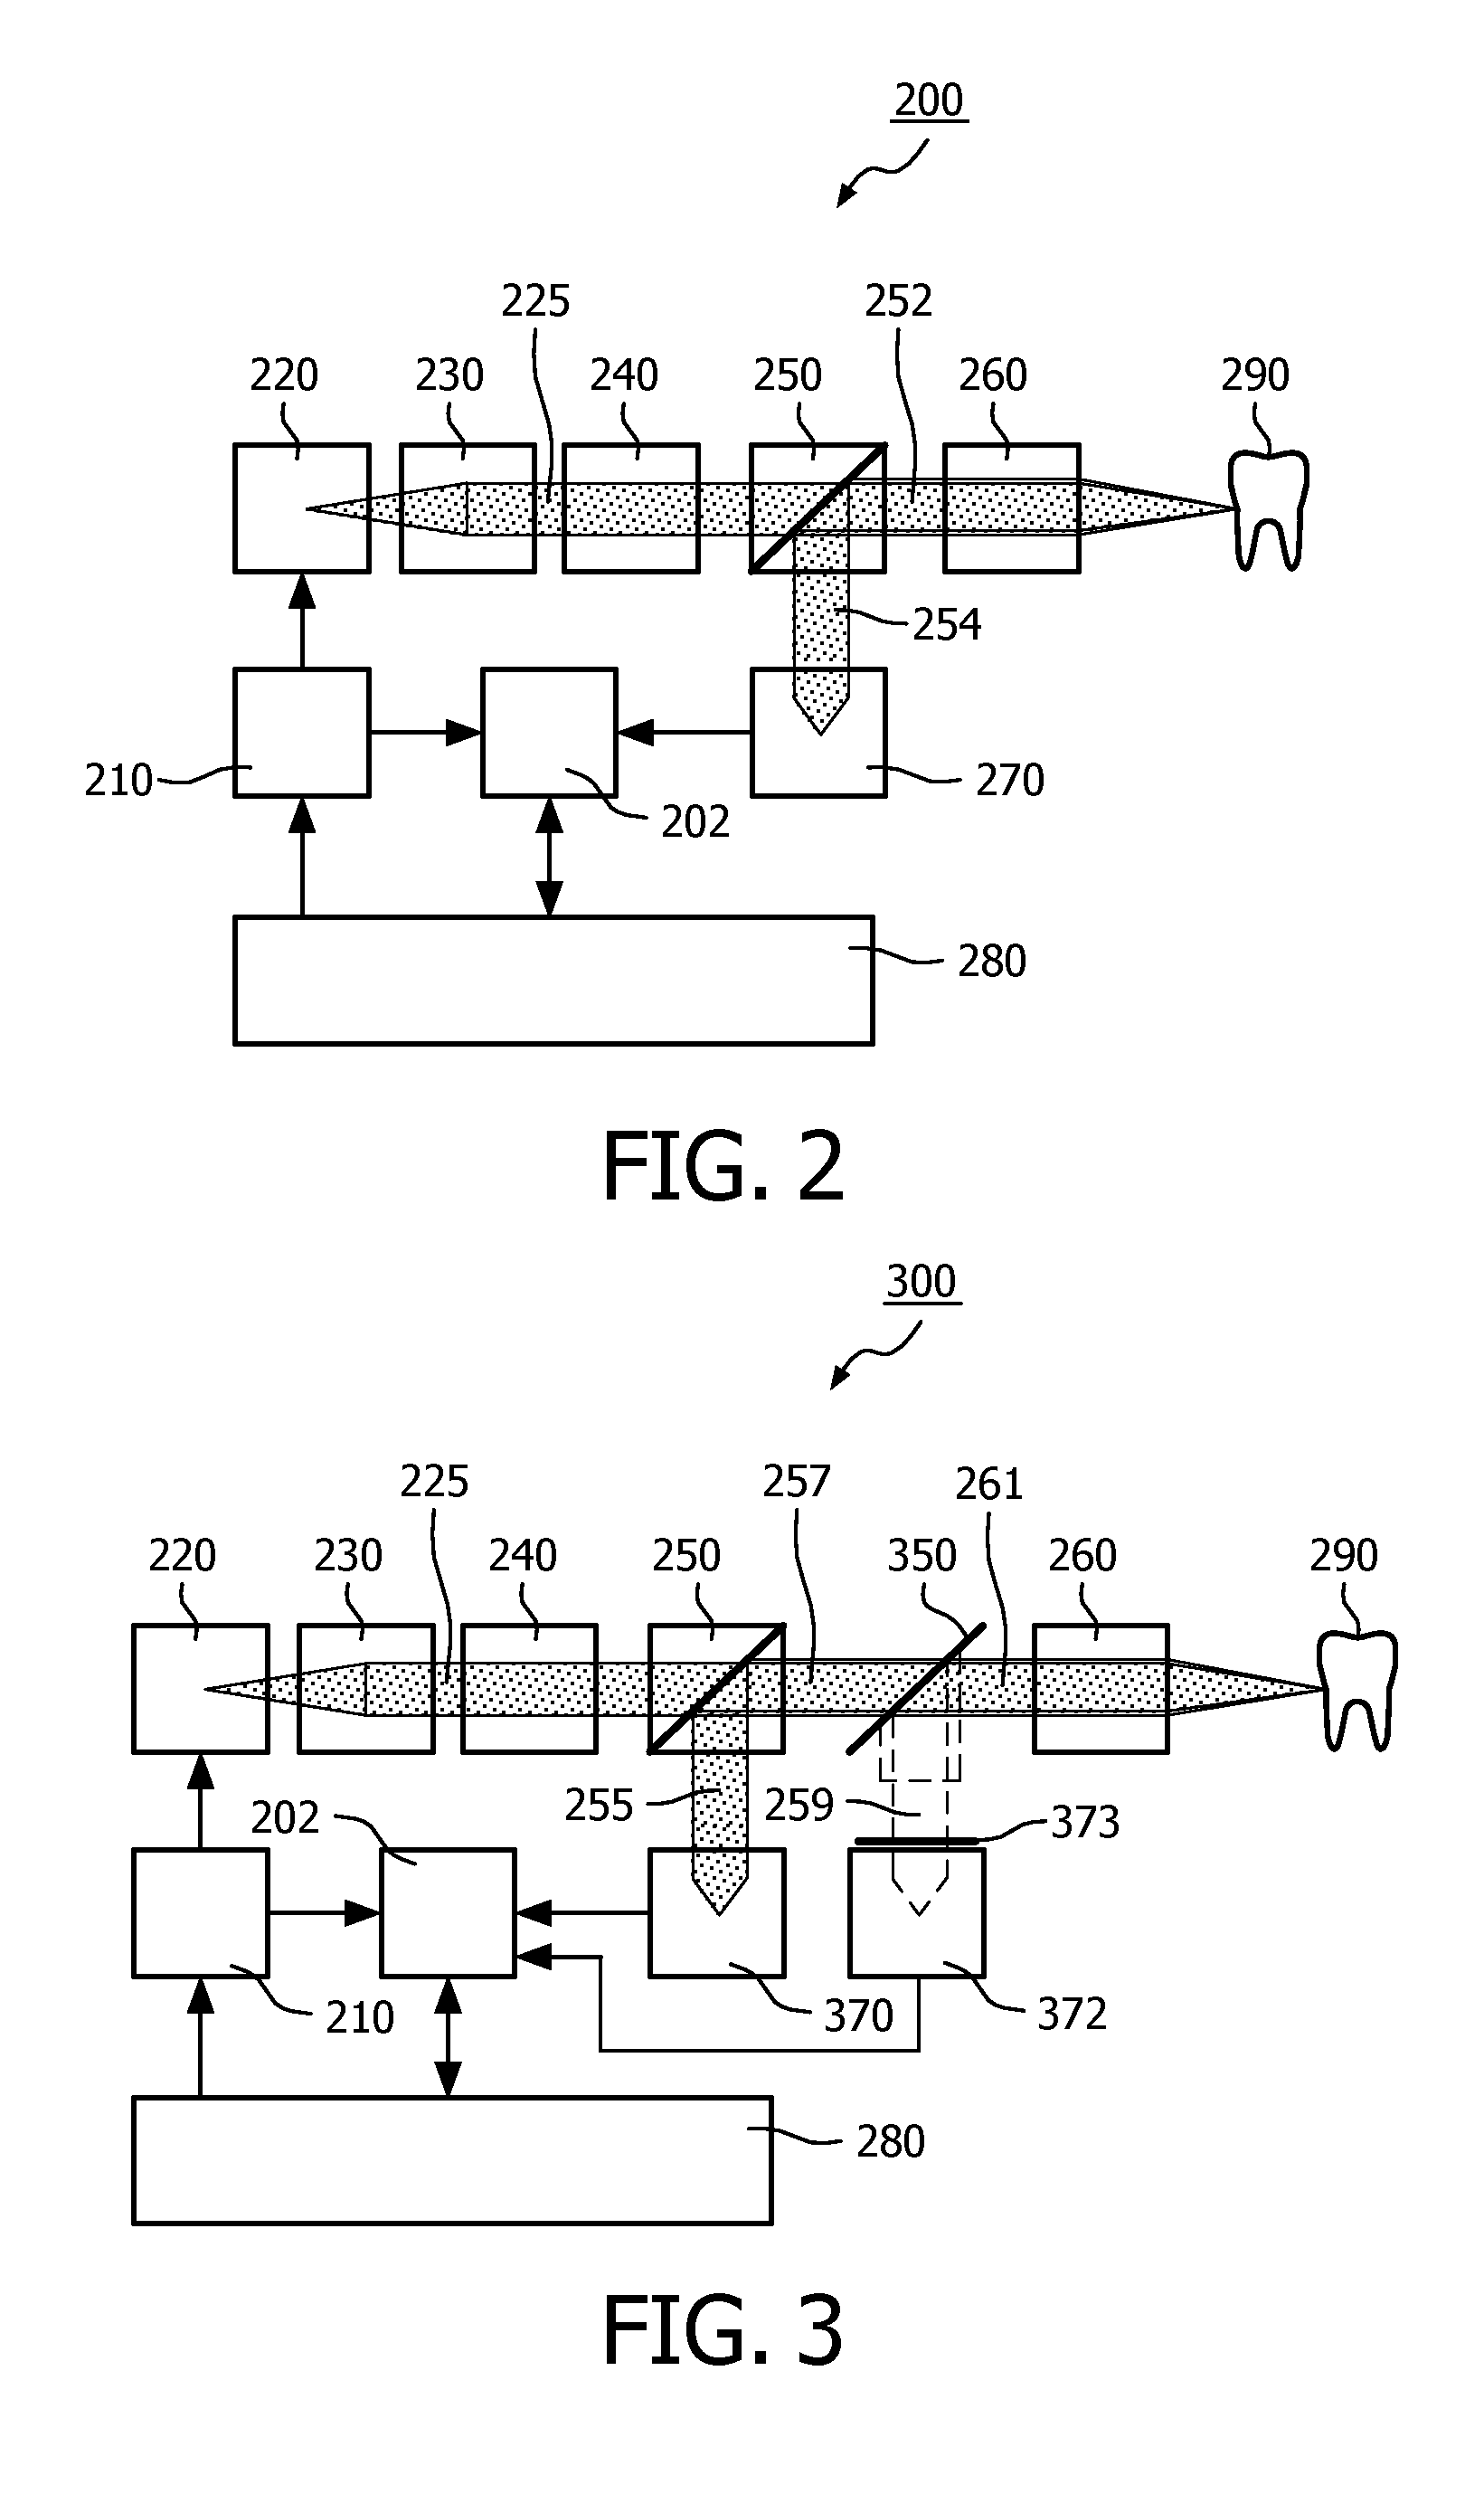 Frequency domain time resolved fluorescence method and system for plaque detection